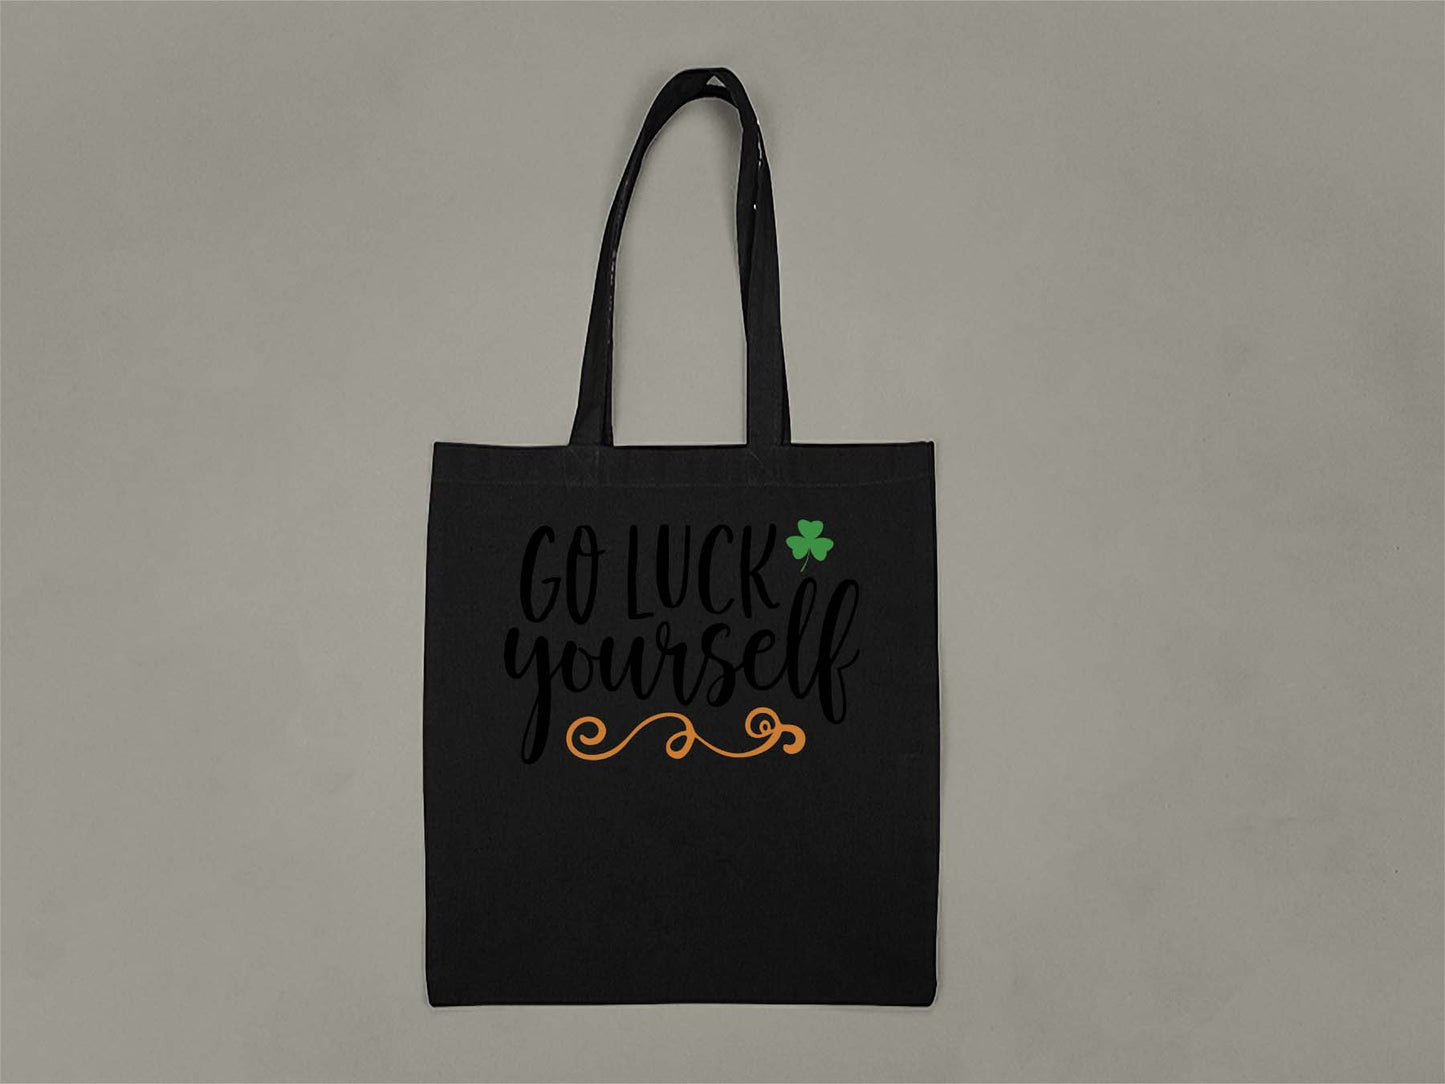 Fat Dave Go Luck Yourself Tote Bag  Black